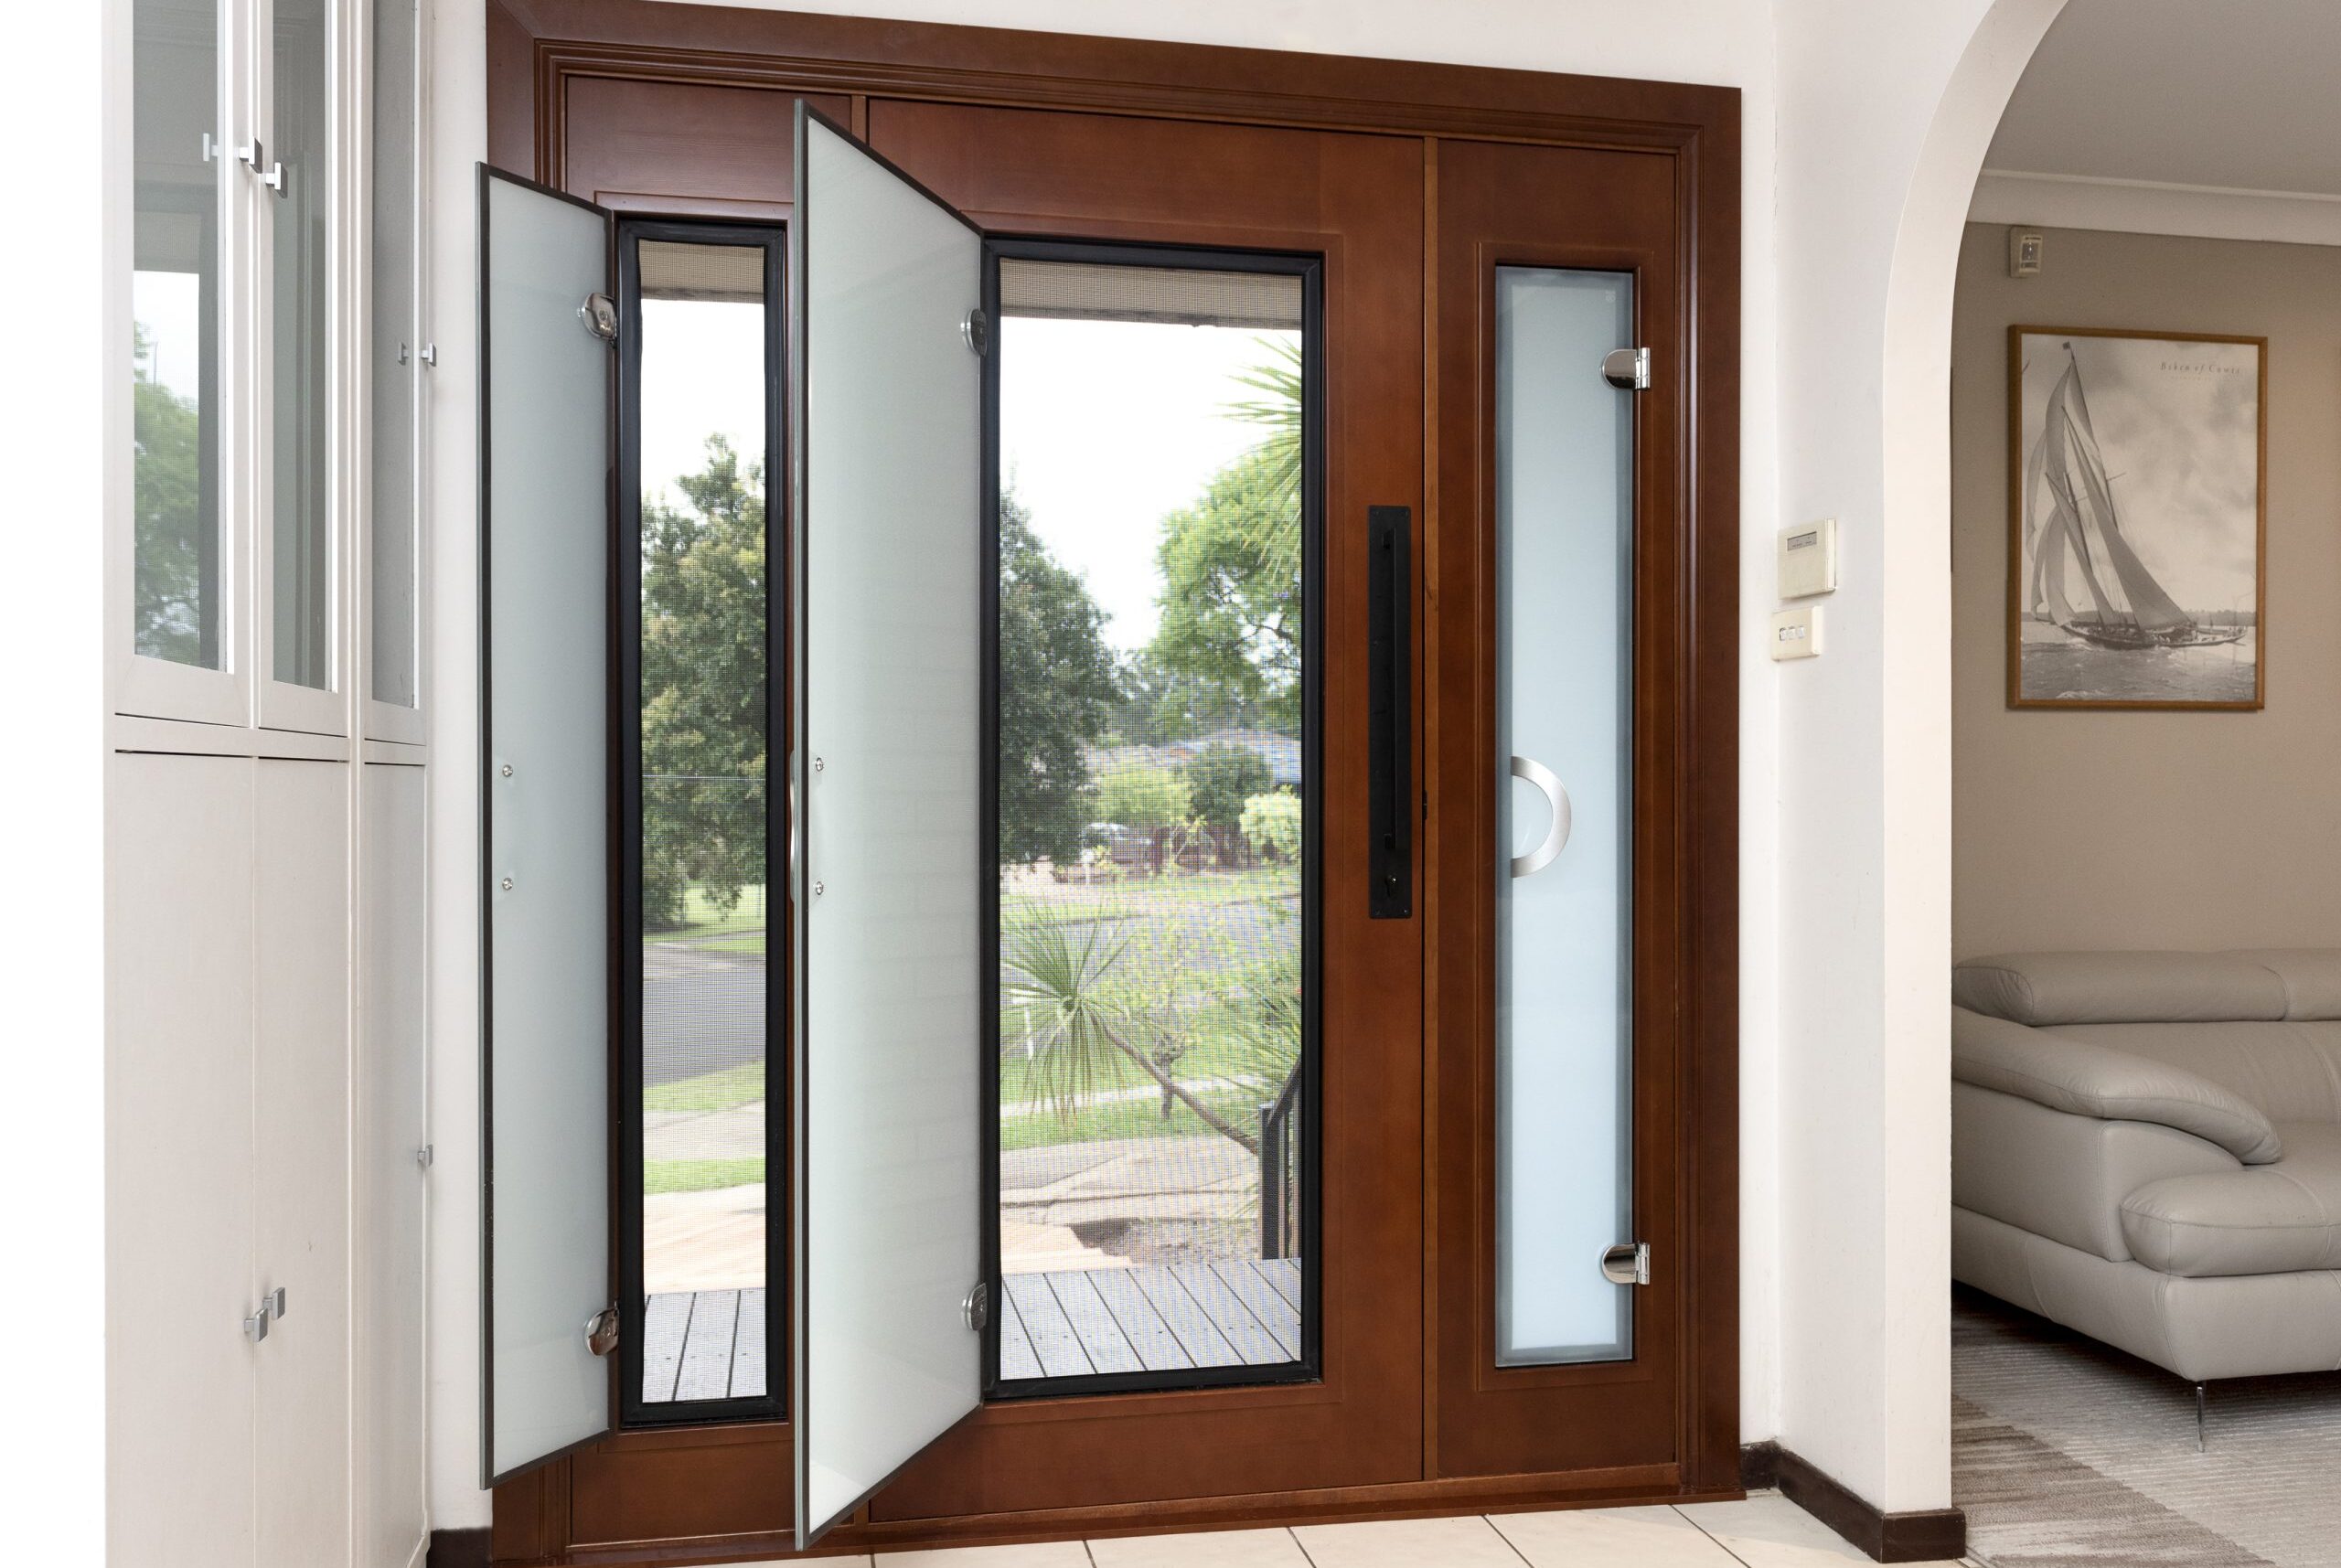 Entry door and screen door in 1, Fully Installed Package Price from $1595, Save up to $374